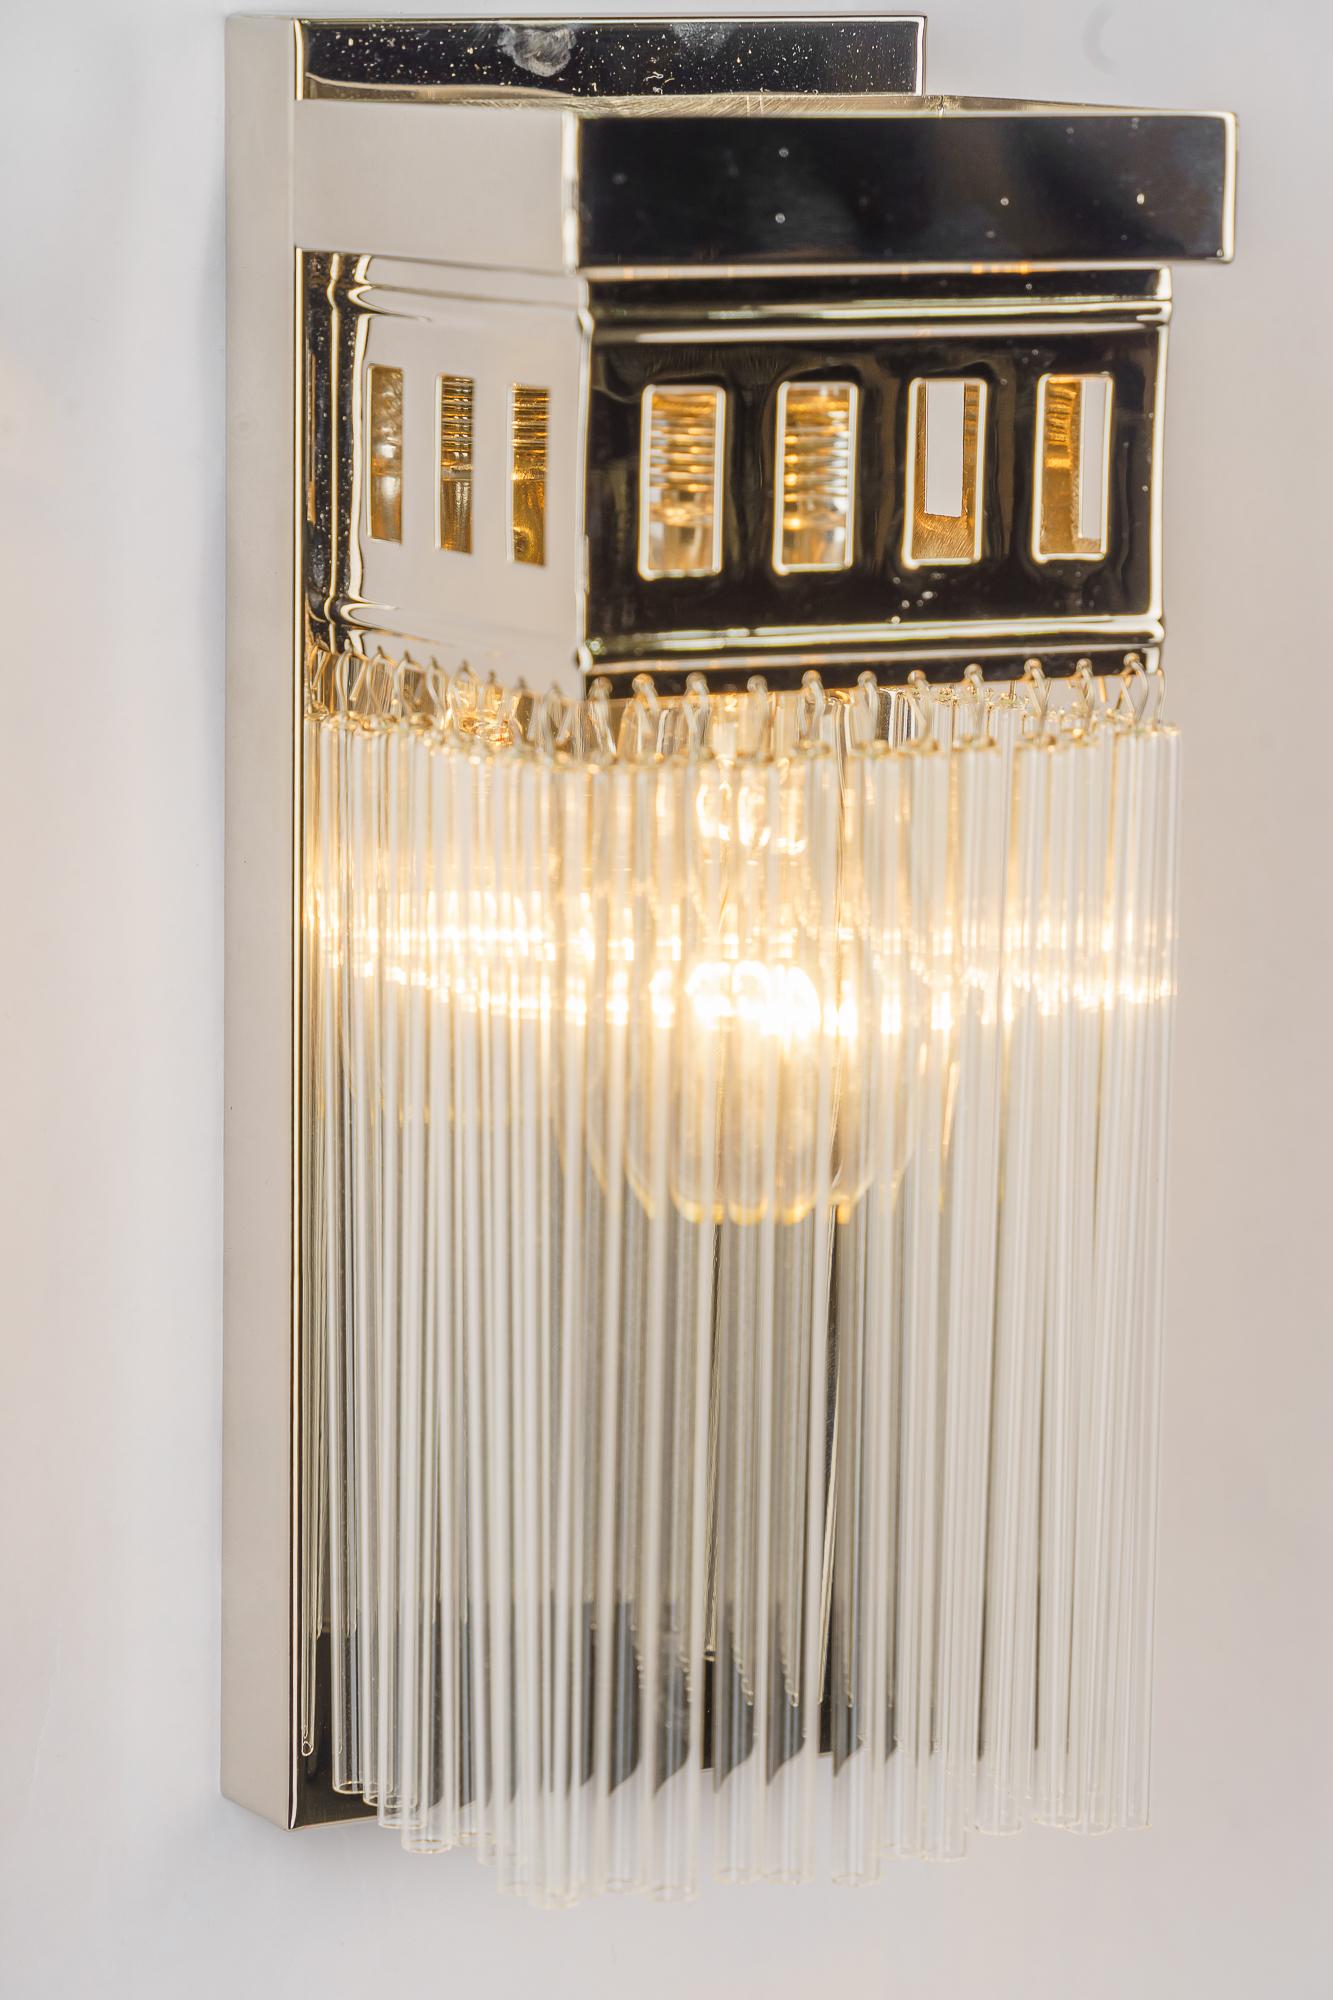 Brass Reproduction of a nickel - plated art deco wall lamp with glass sticks For Sale